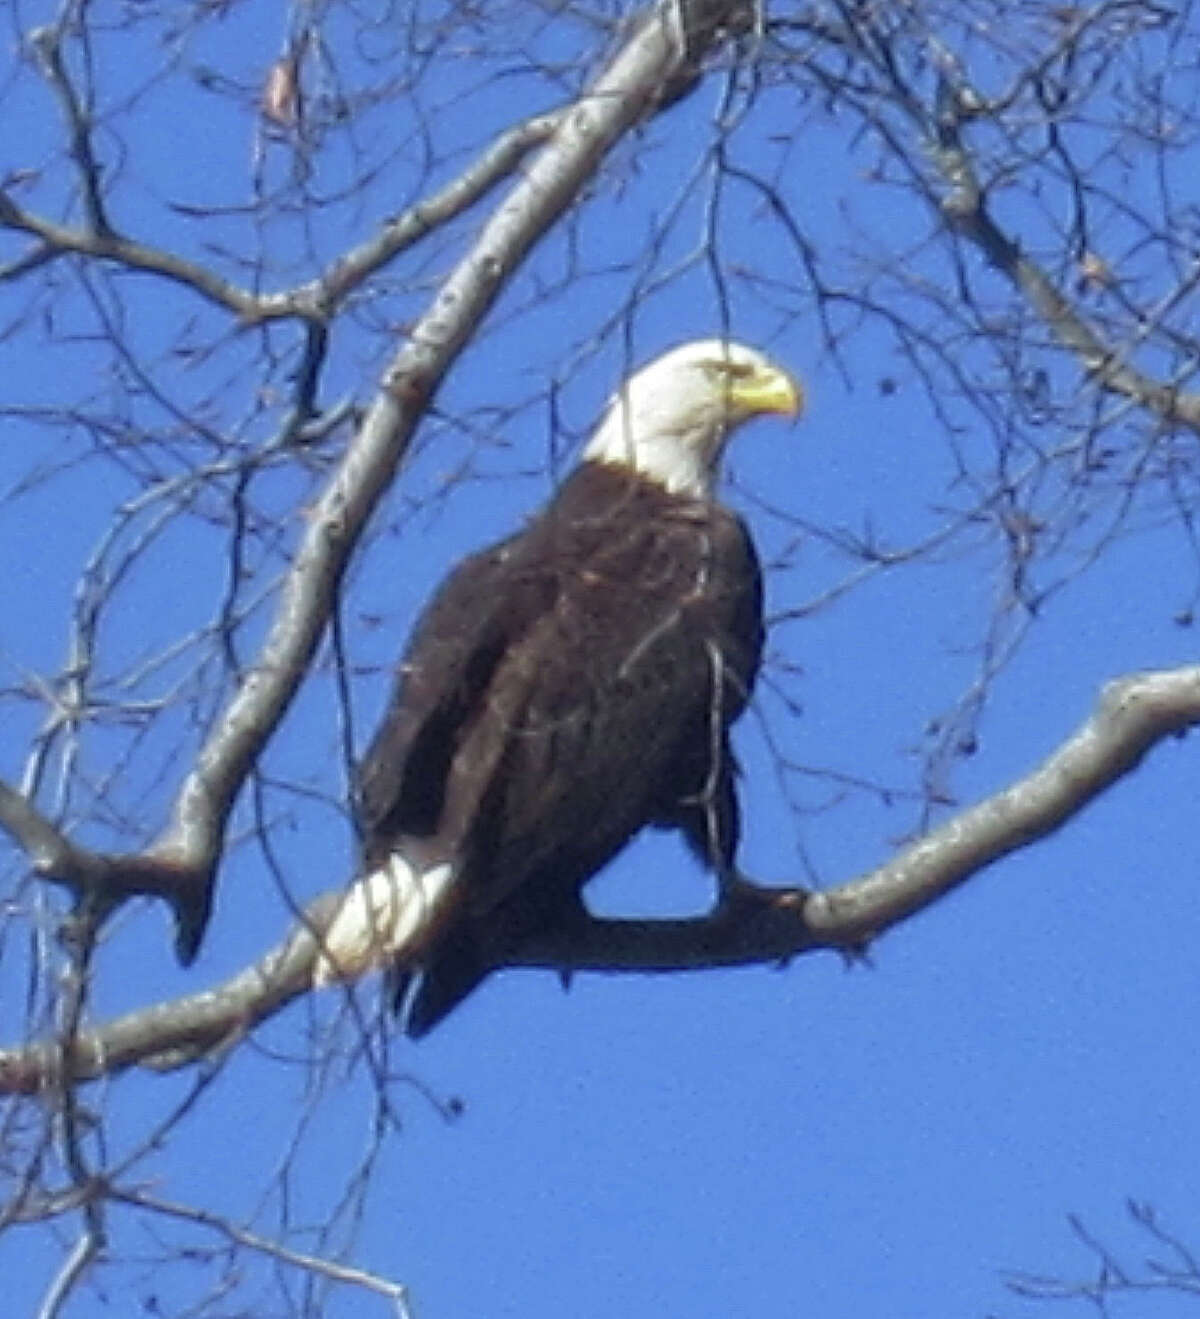 Greenwich resident Sandy Soule spotted this bald eagle by her home along the Mianus River just before 1 p.m. Tuesday.